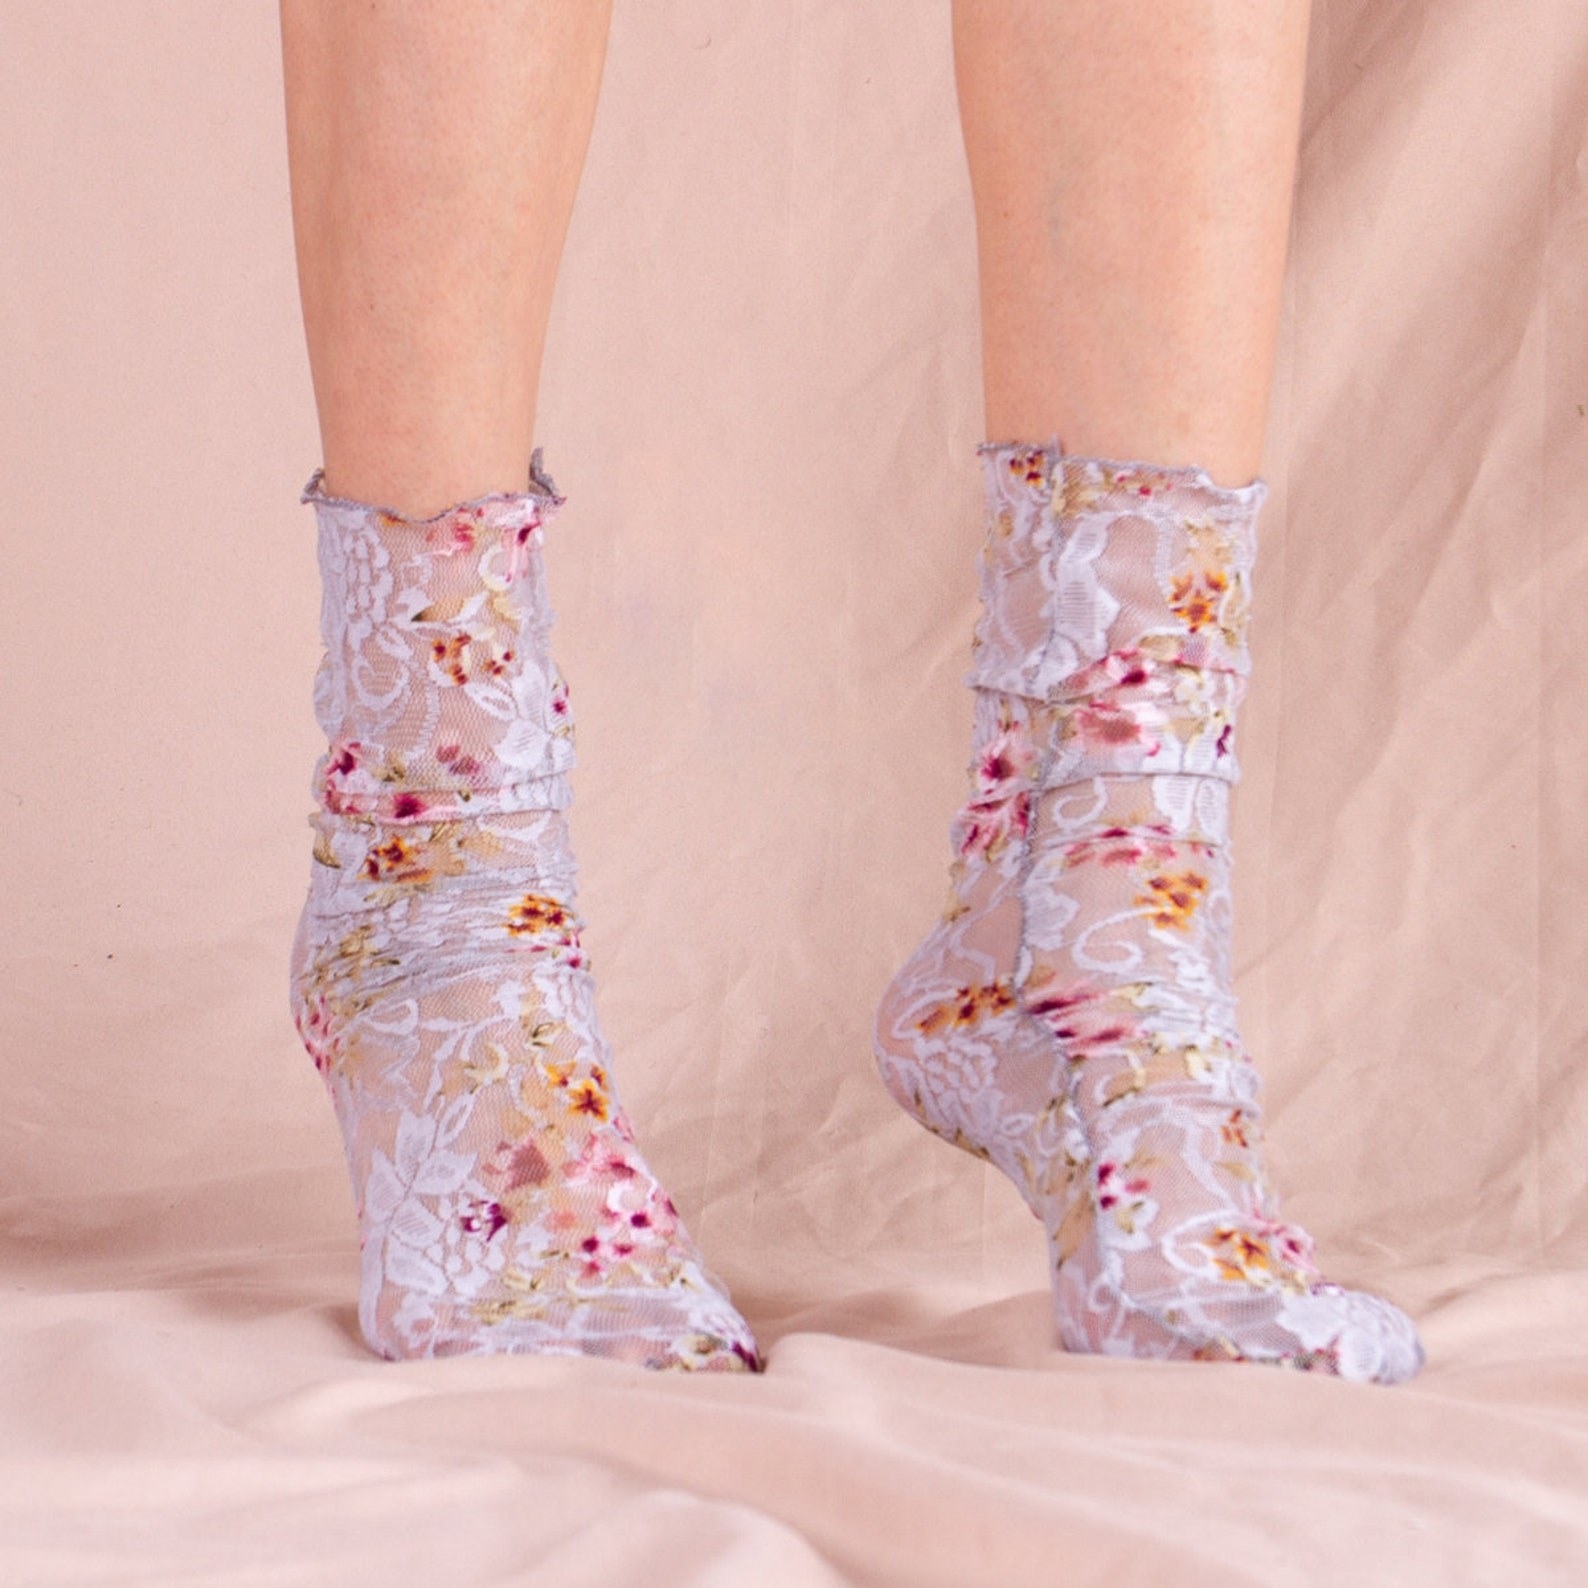 Two feet modeling gray mesh and lace socks with a floral pattern